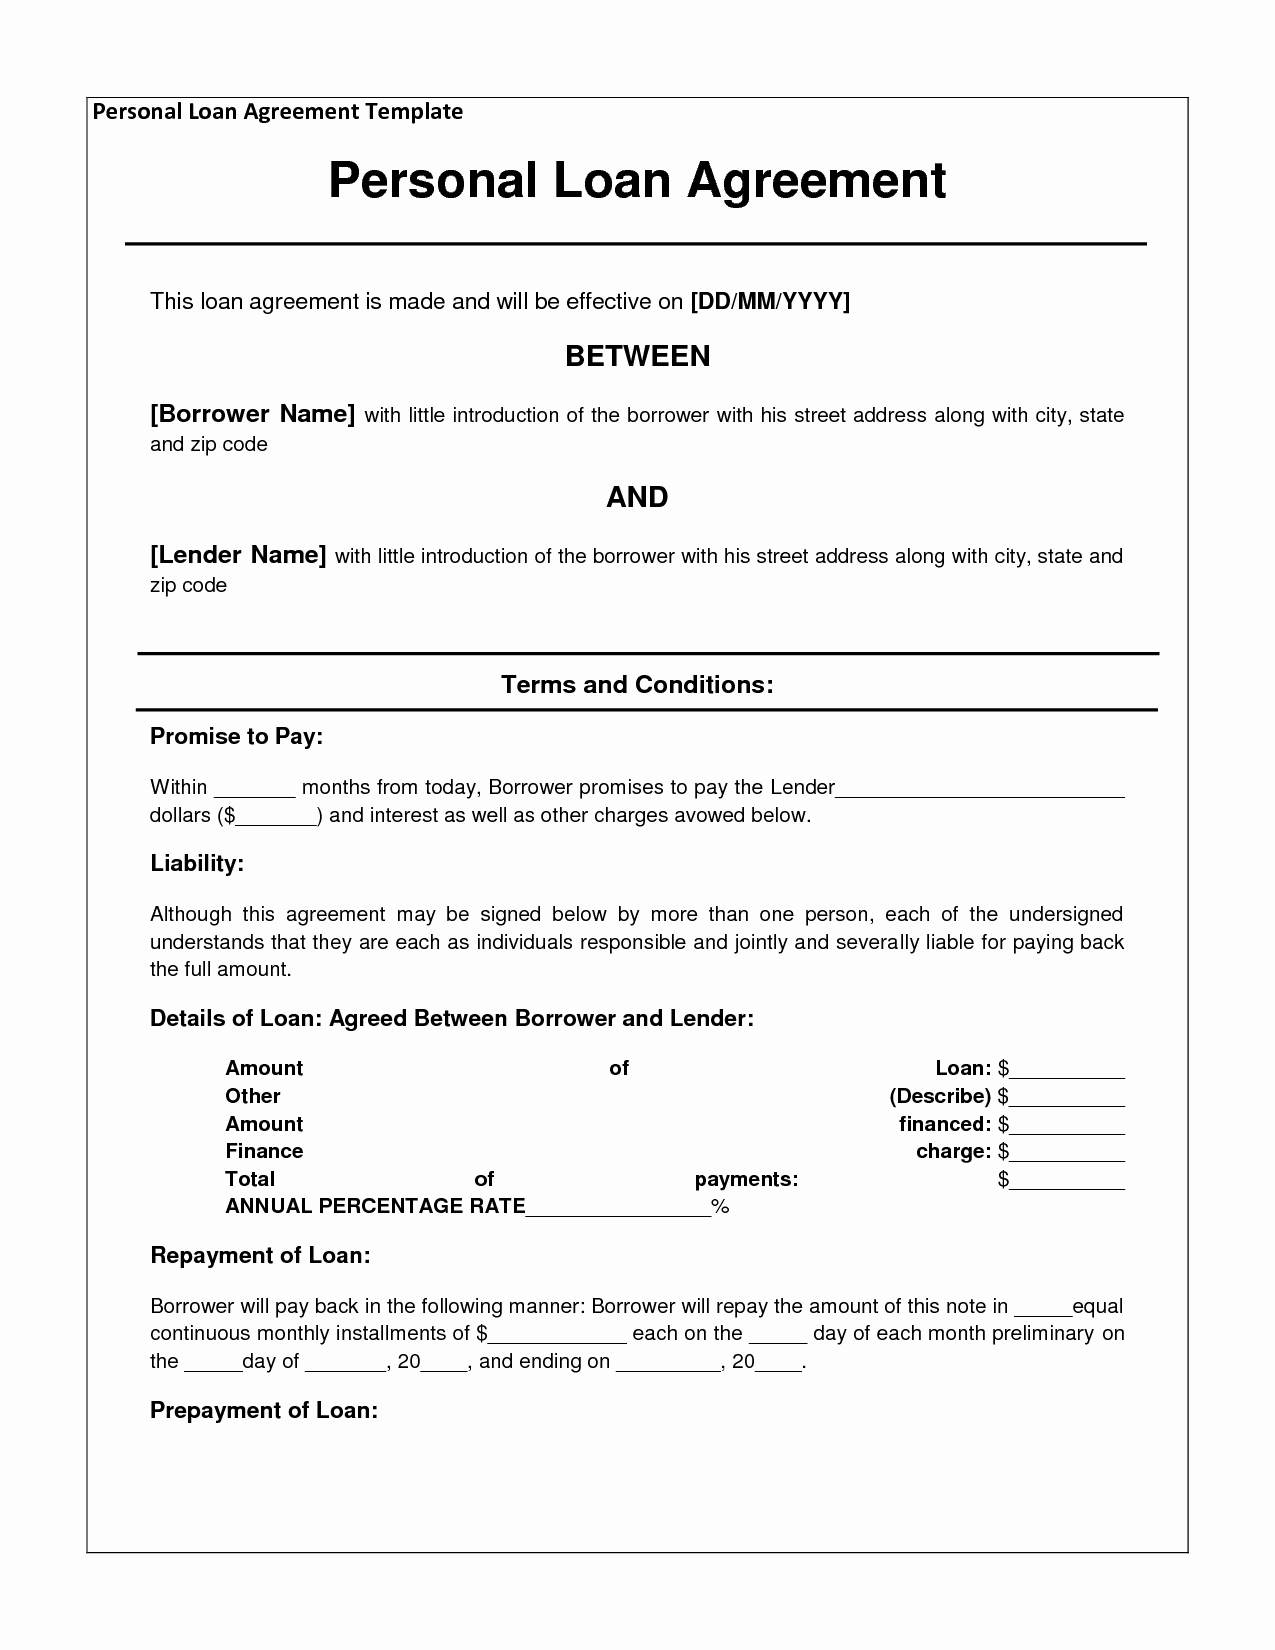 Personal Loan Template Free Best Of 14 Loan Agreement Templates Excel Pdf formats